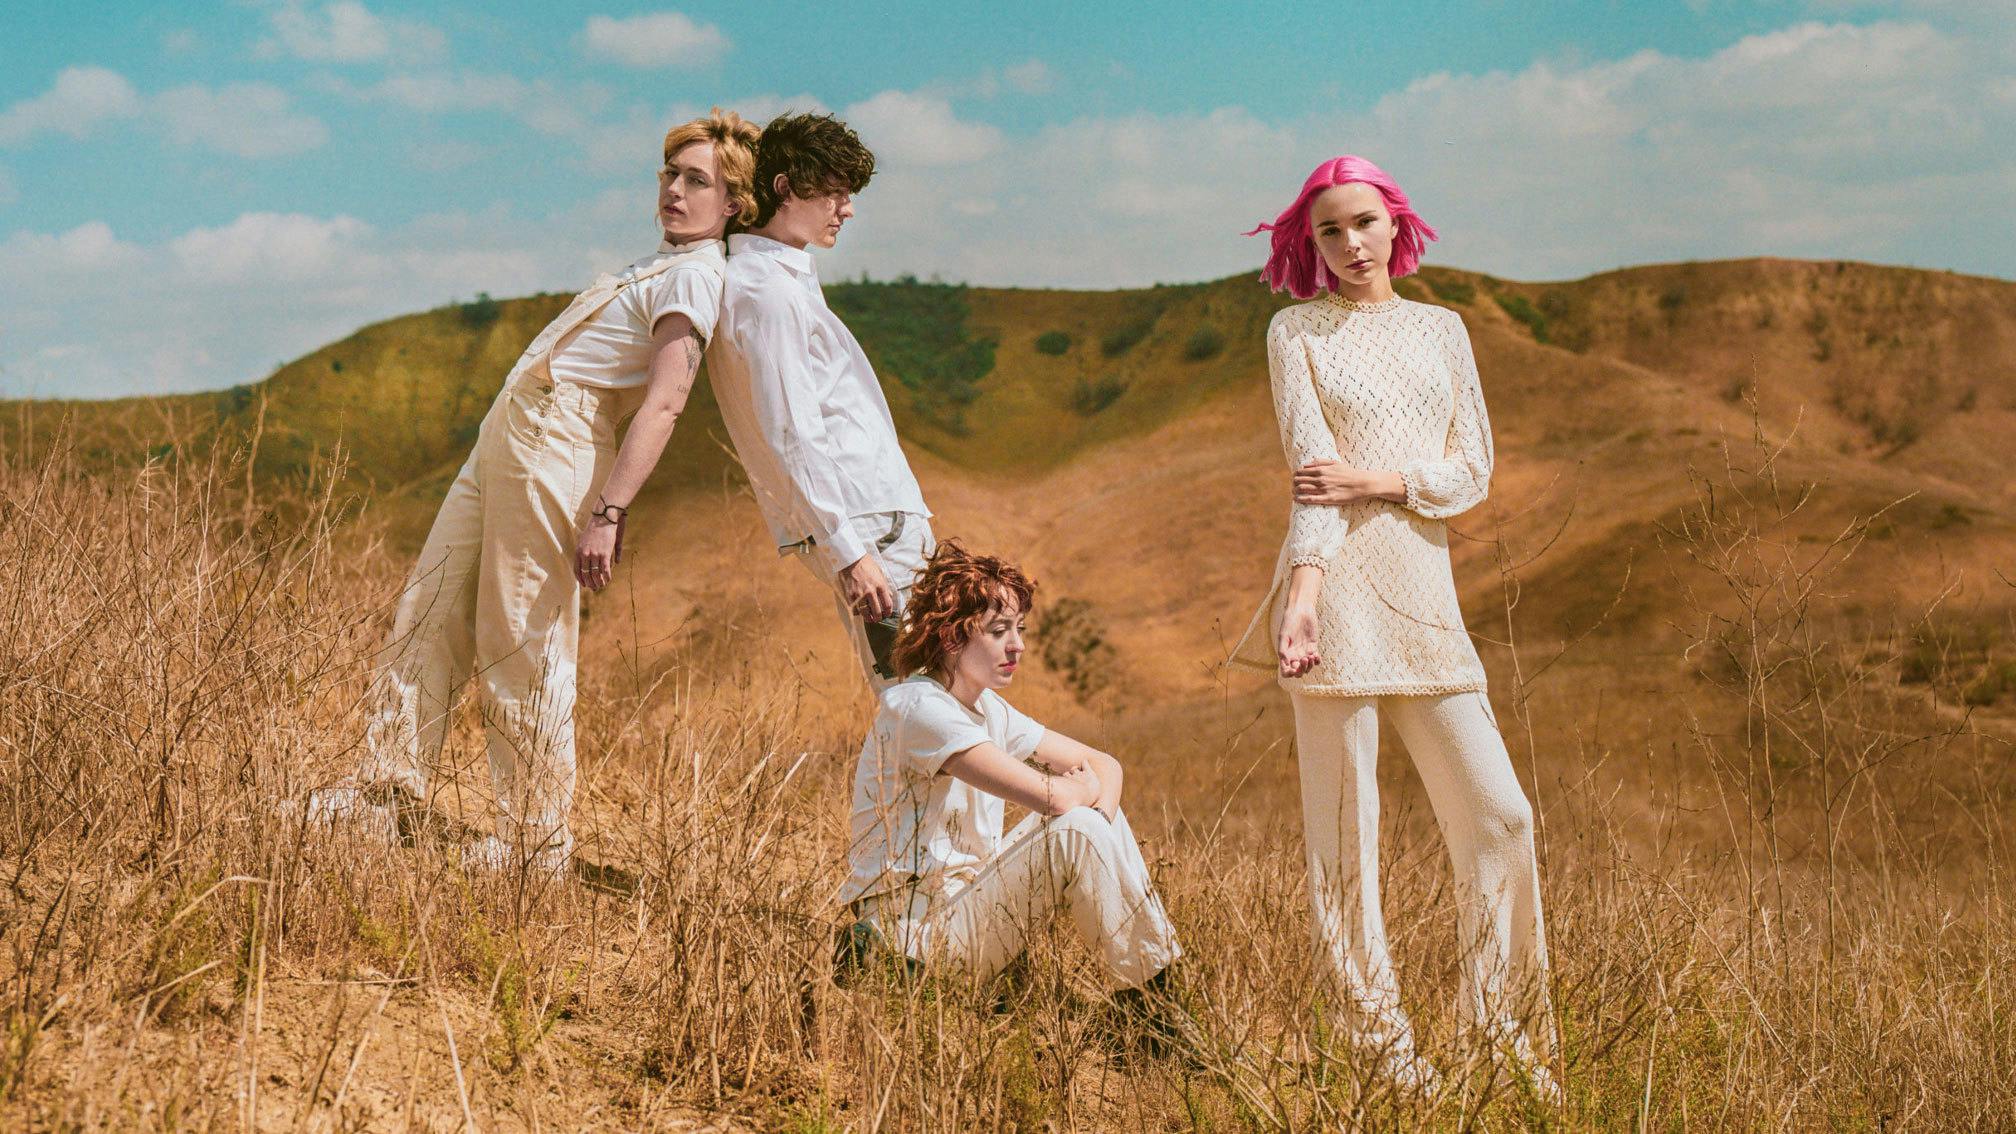 The Regrettes have announced a couple of club shows